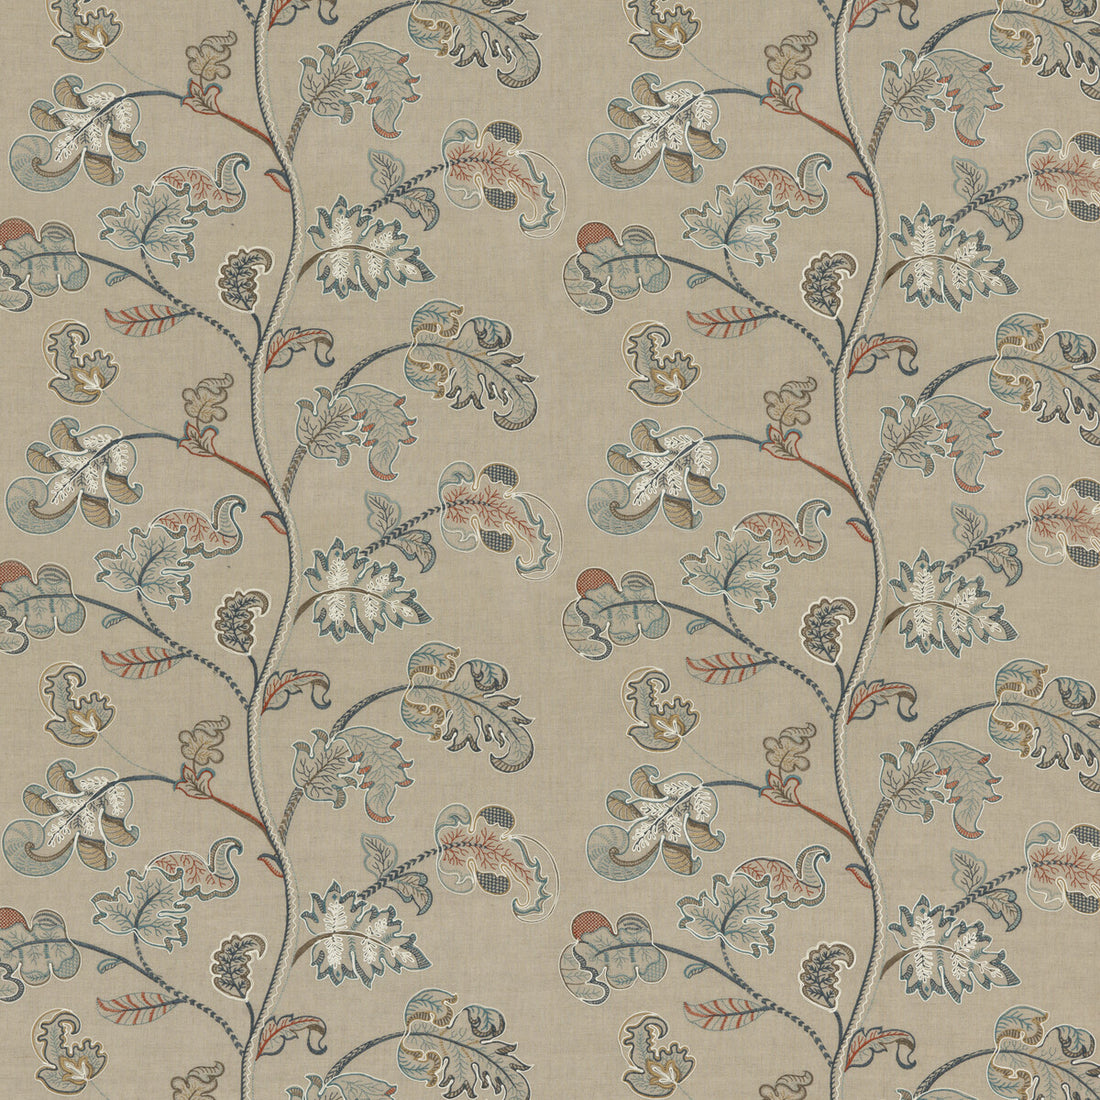 Alderwood fabric in teal color - pattern BF10769.2.0 - by G P &amp; J Baker in the Keswick Embroideries collection